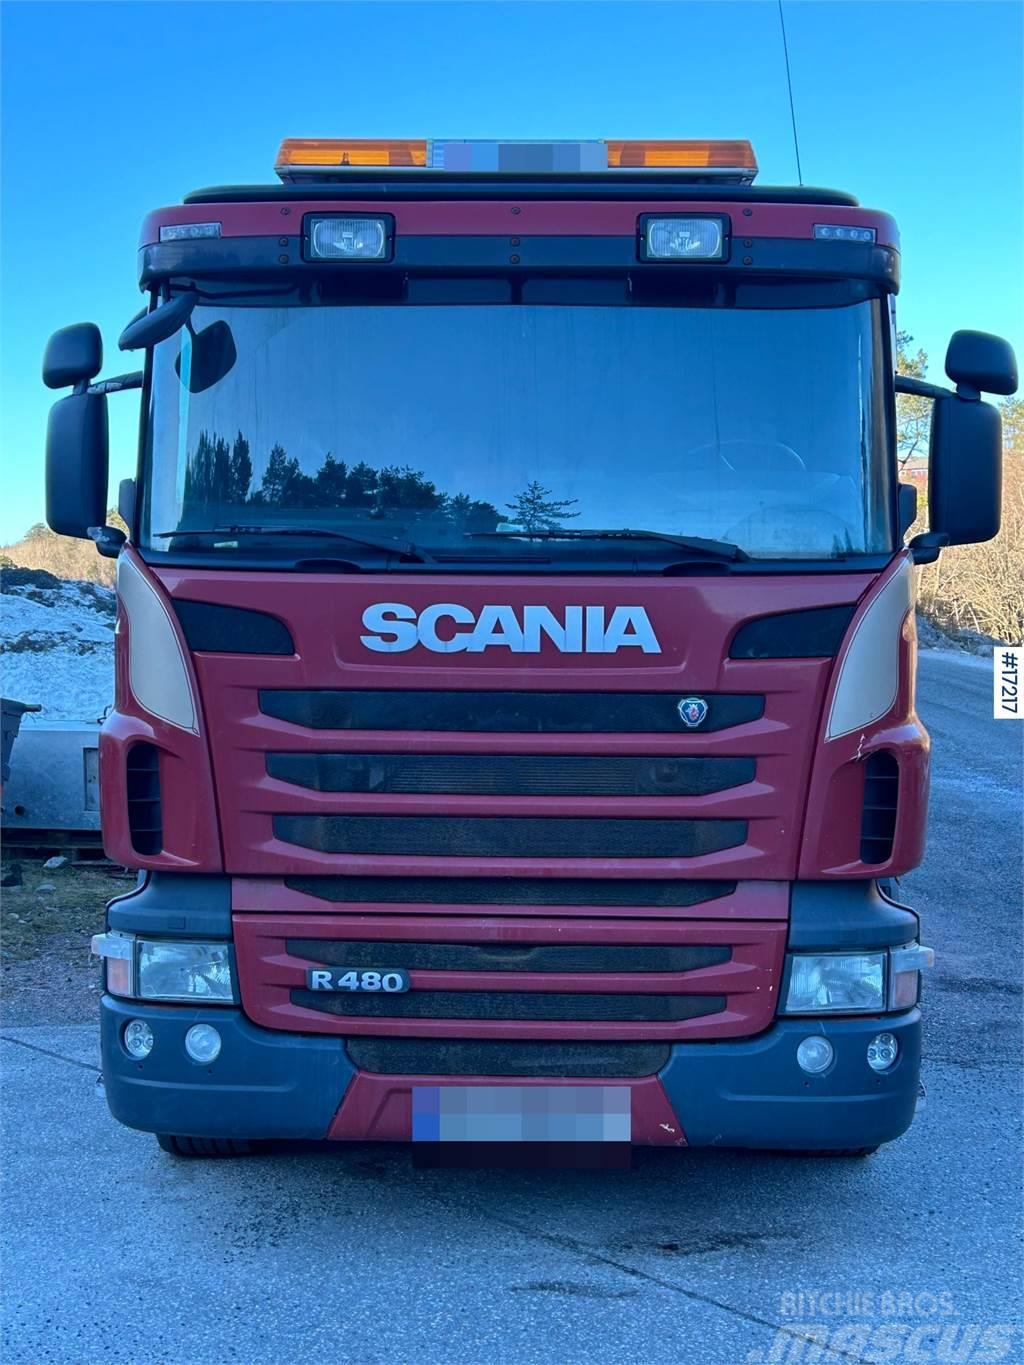 Scania R480 6x2 combi Fico suction/pump truck for sale as Tovornjaki cisterne